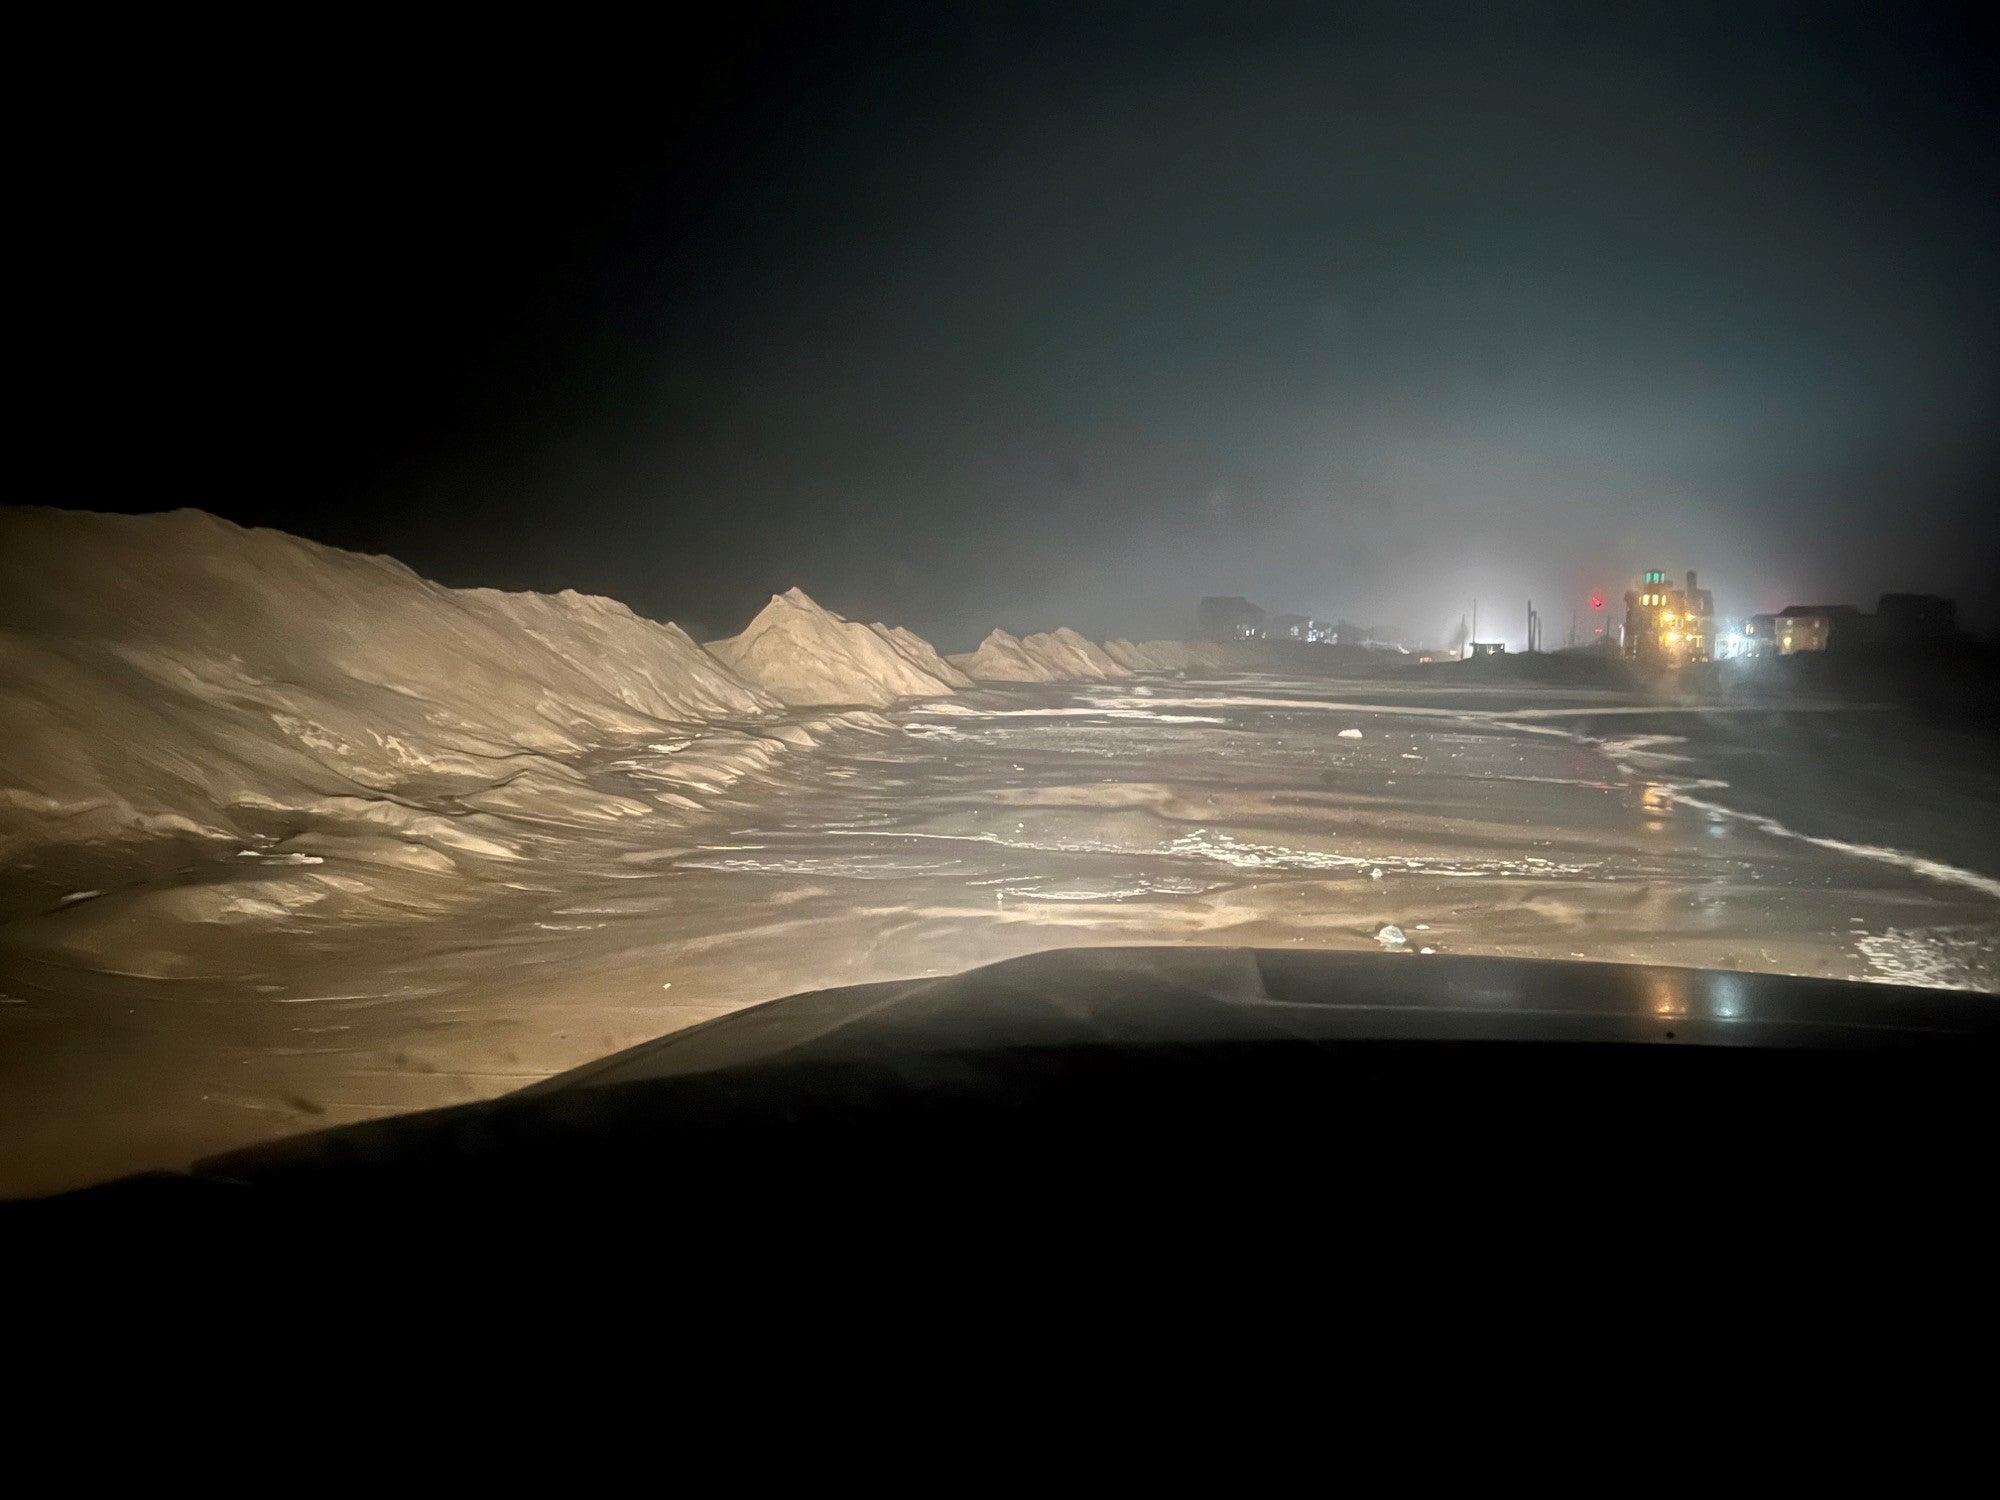 This nighttime photo shows high tides bringing water over sand dunes, causing road closures and threatening structures. (Photo: NC Department of Transportation, Fair Use)